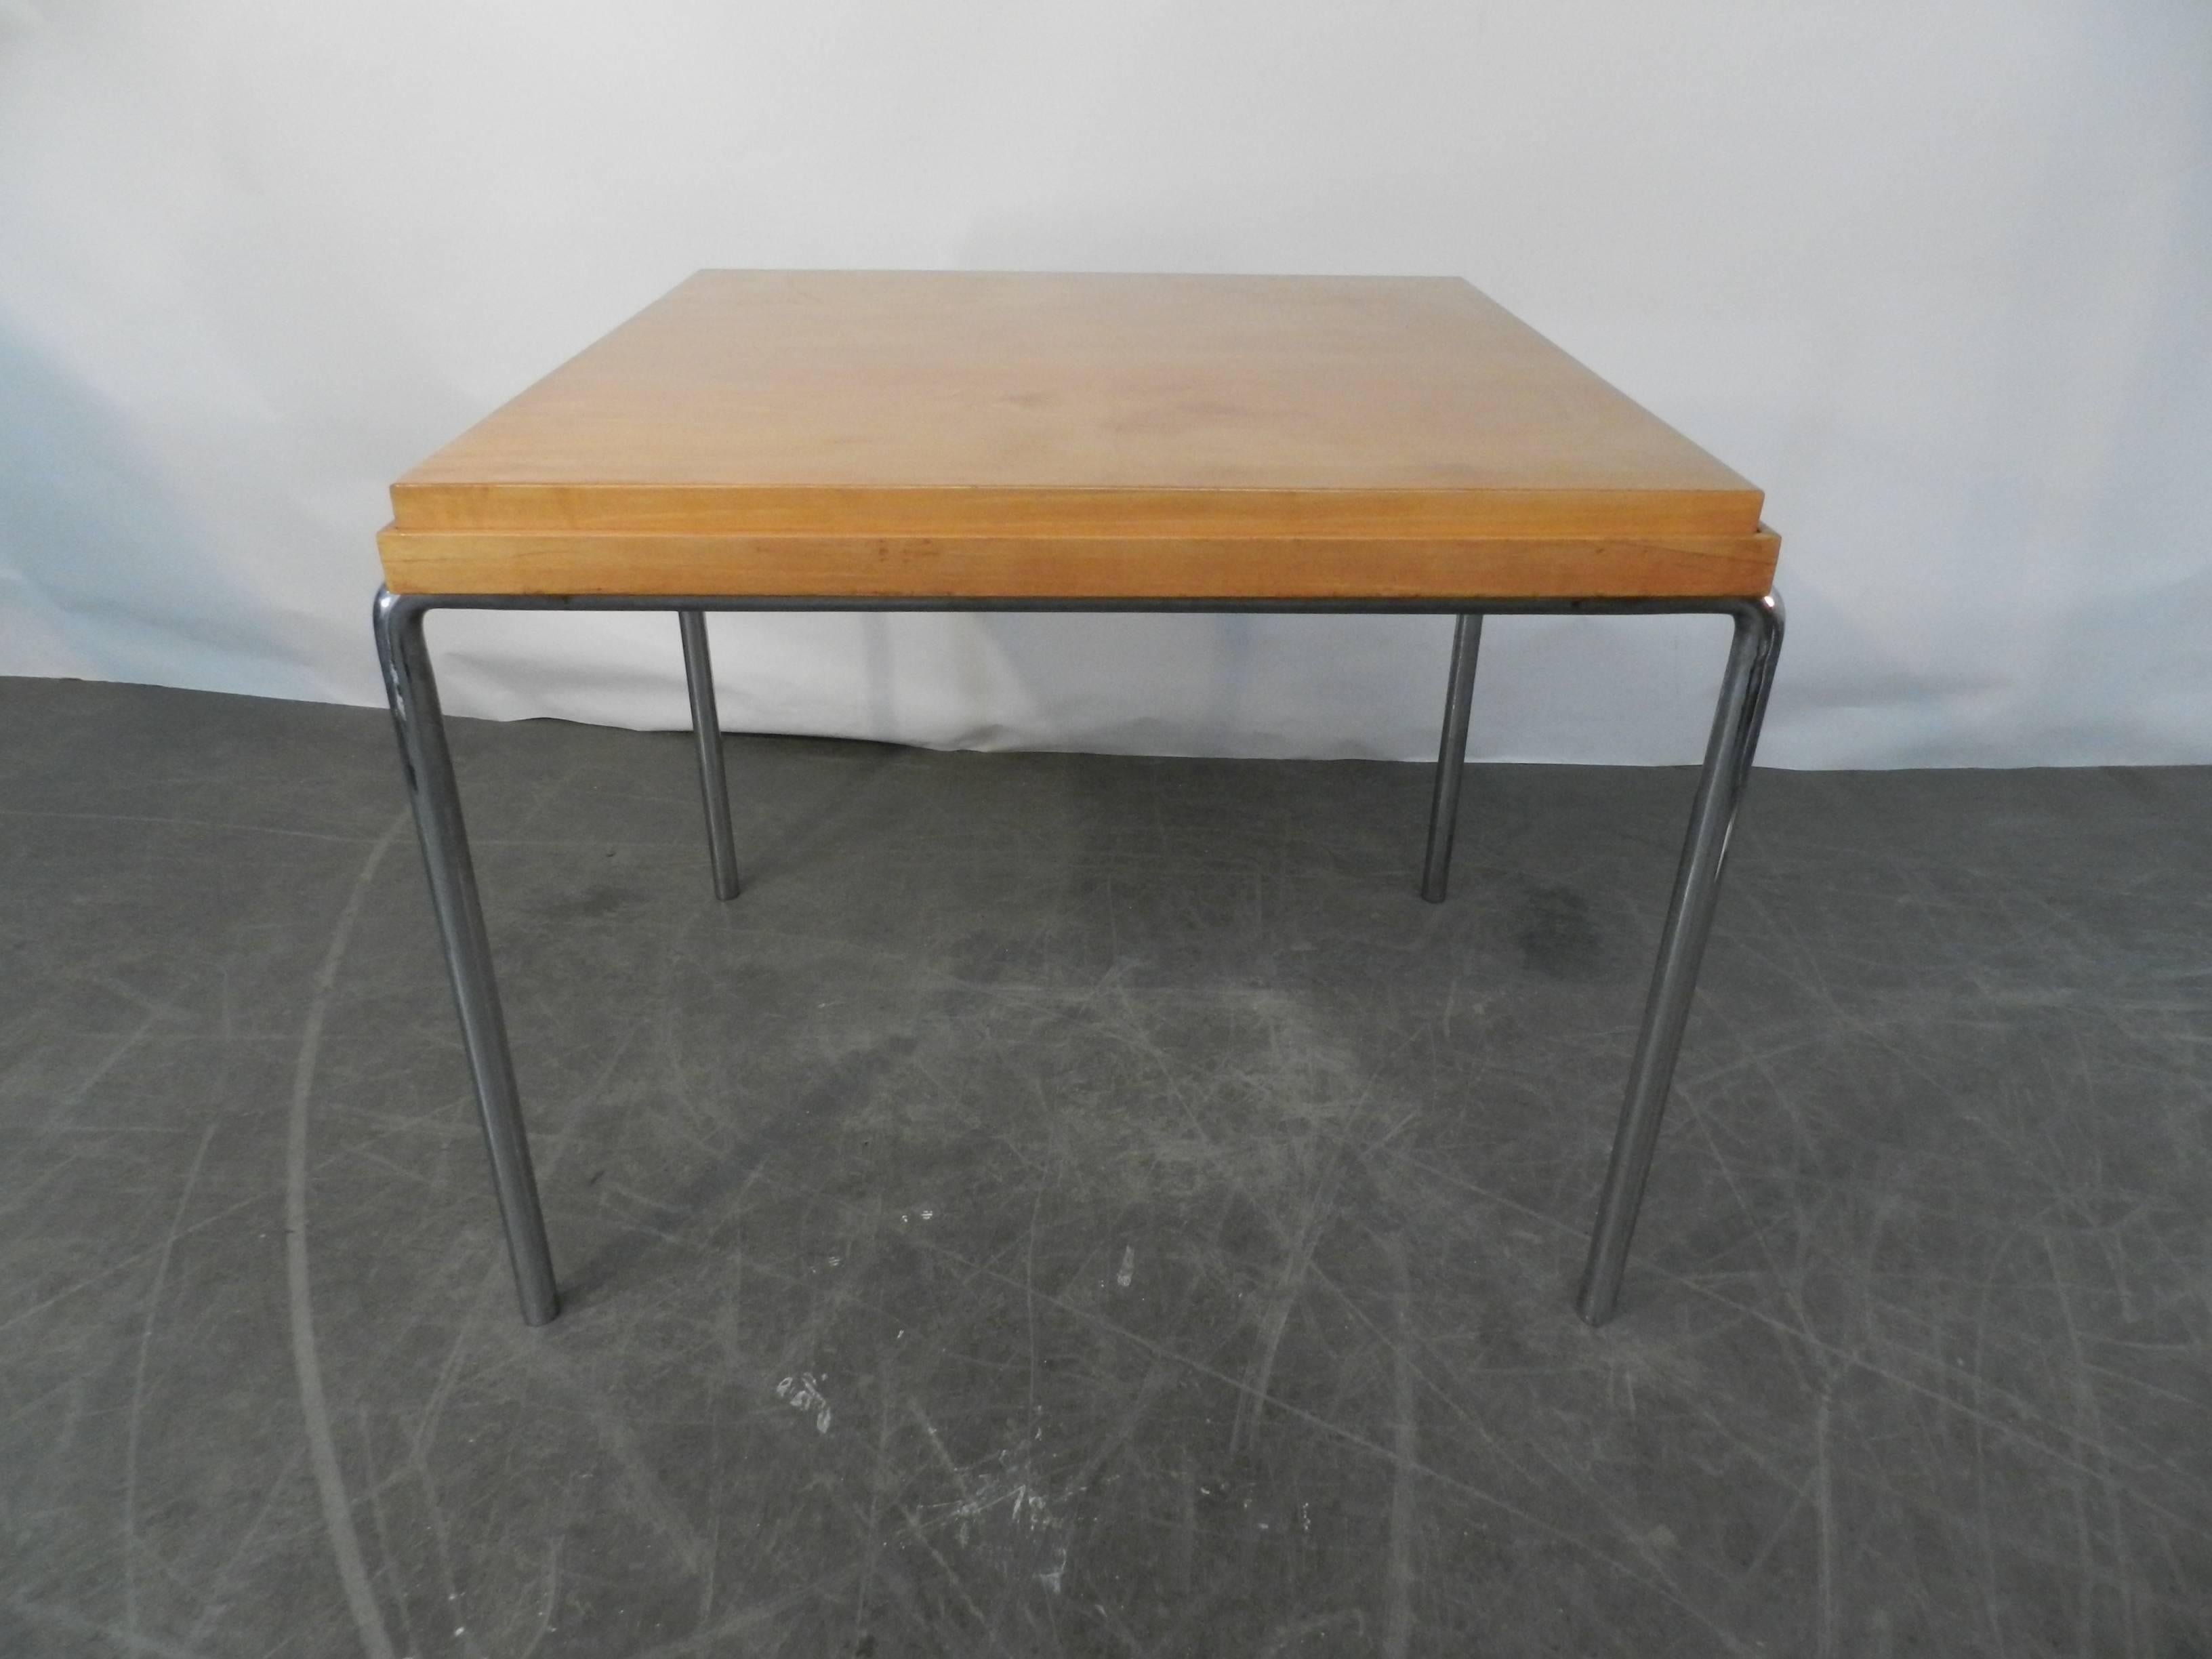 French Modernist Art Deco Games Table in Sycamore and Chrome circa 1920/1930